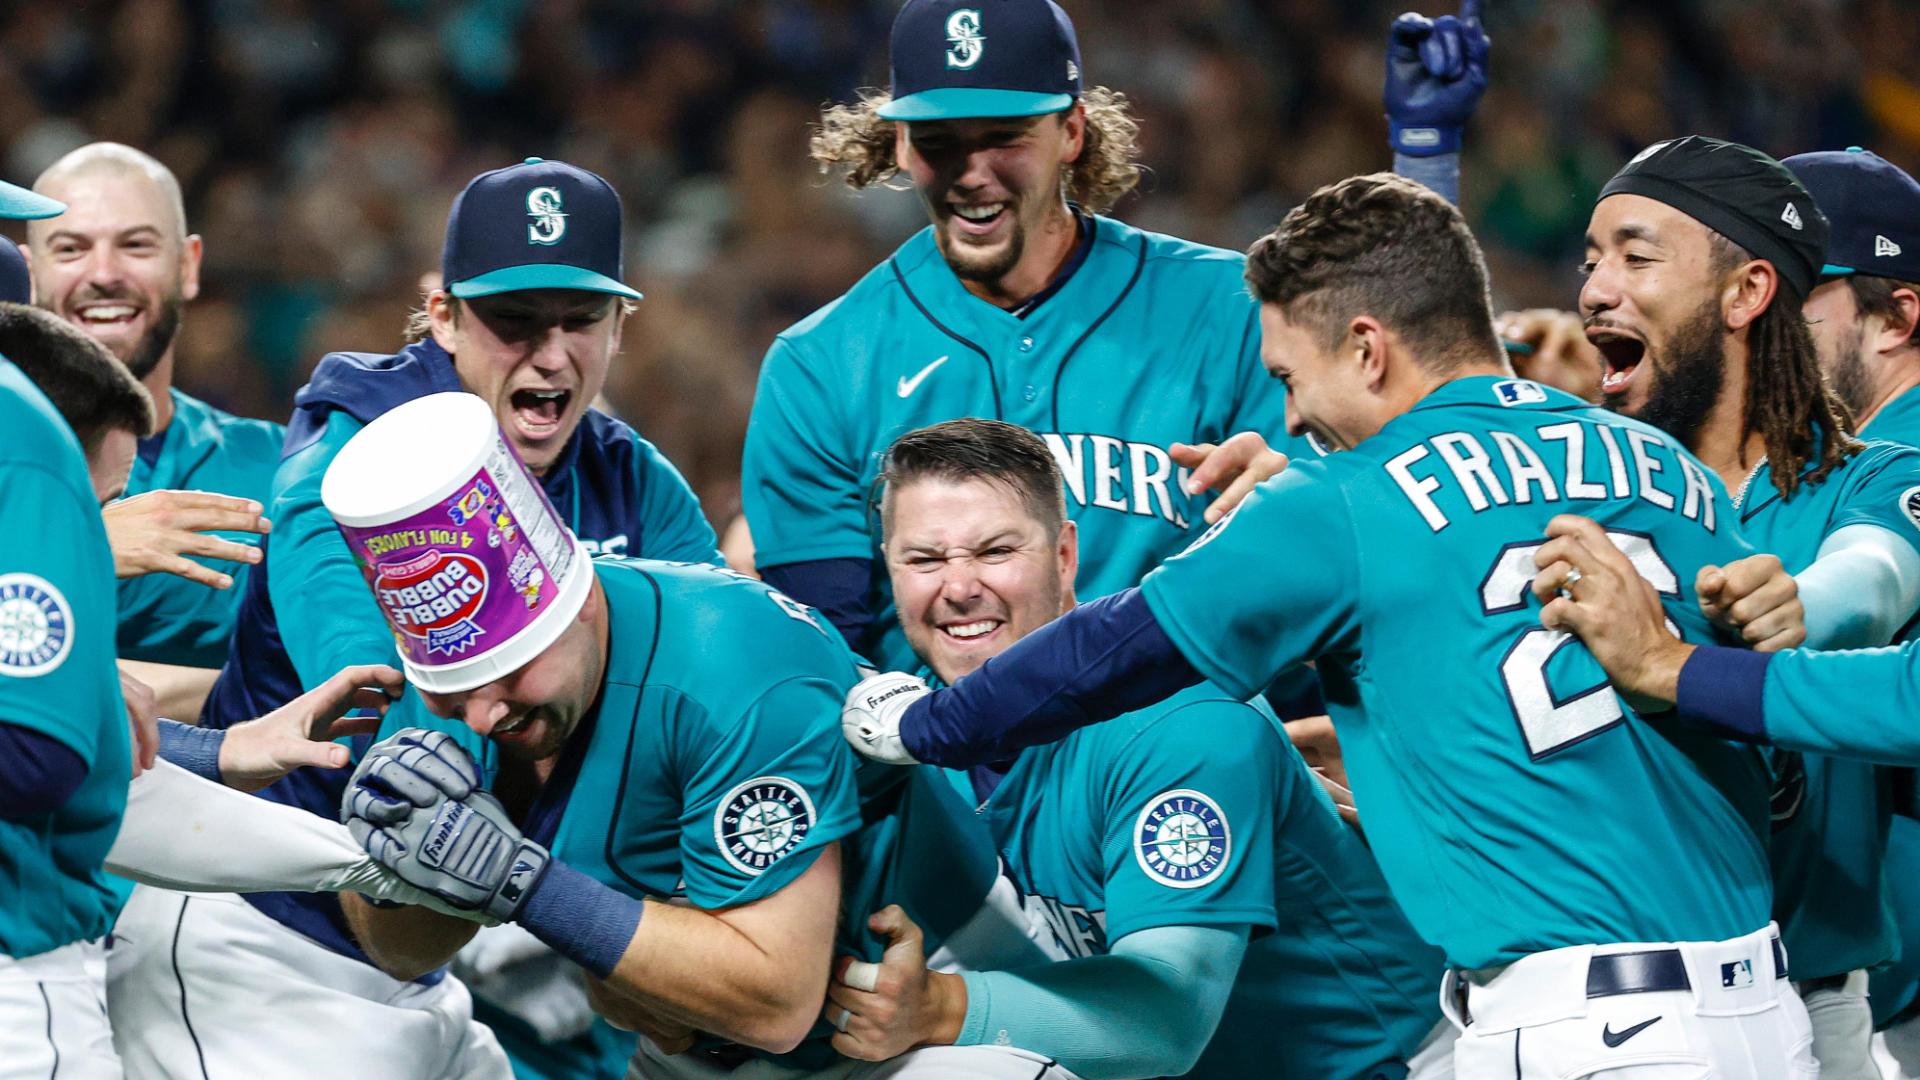 Raleigh ends Mariners' 21-year playoff drought - Taipei Times